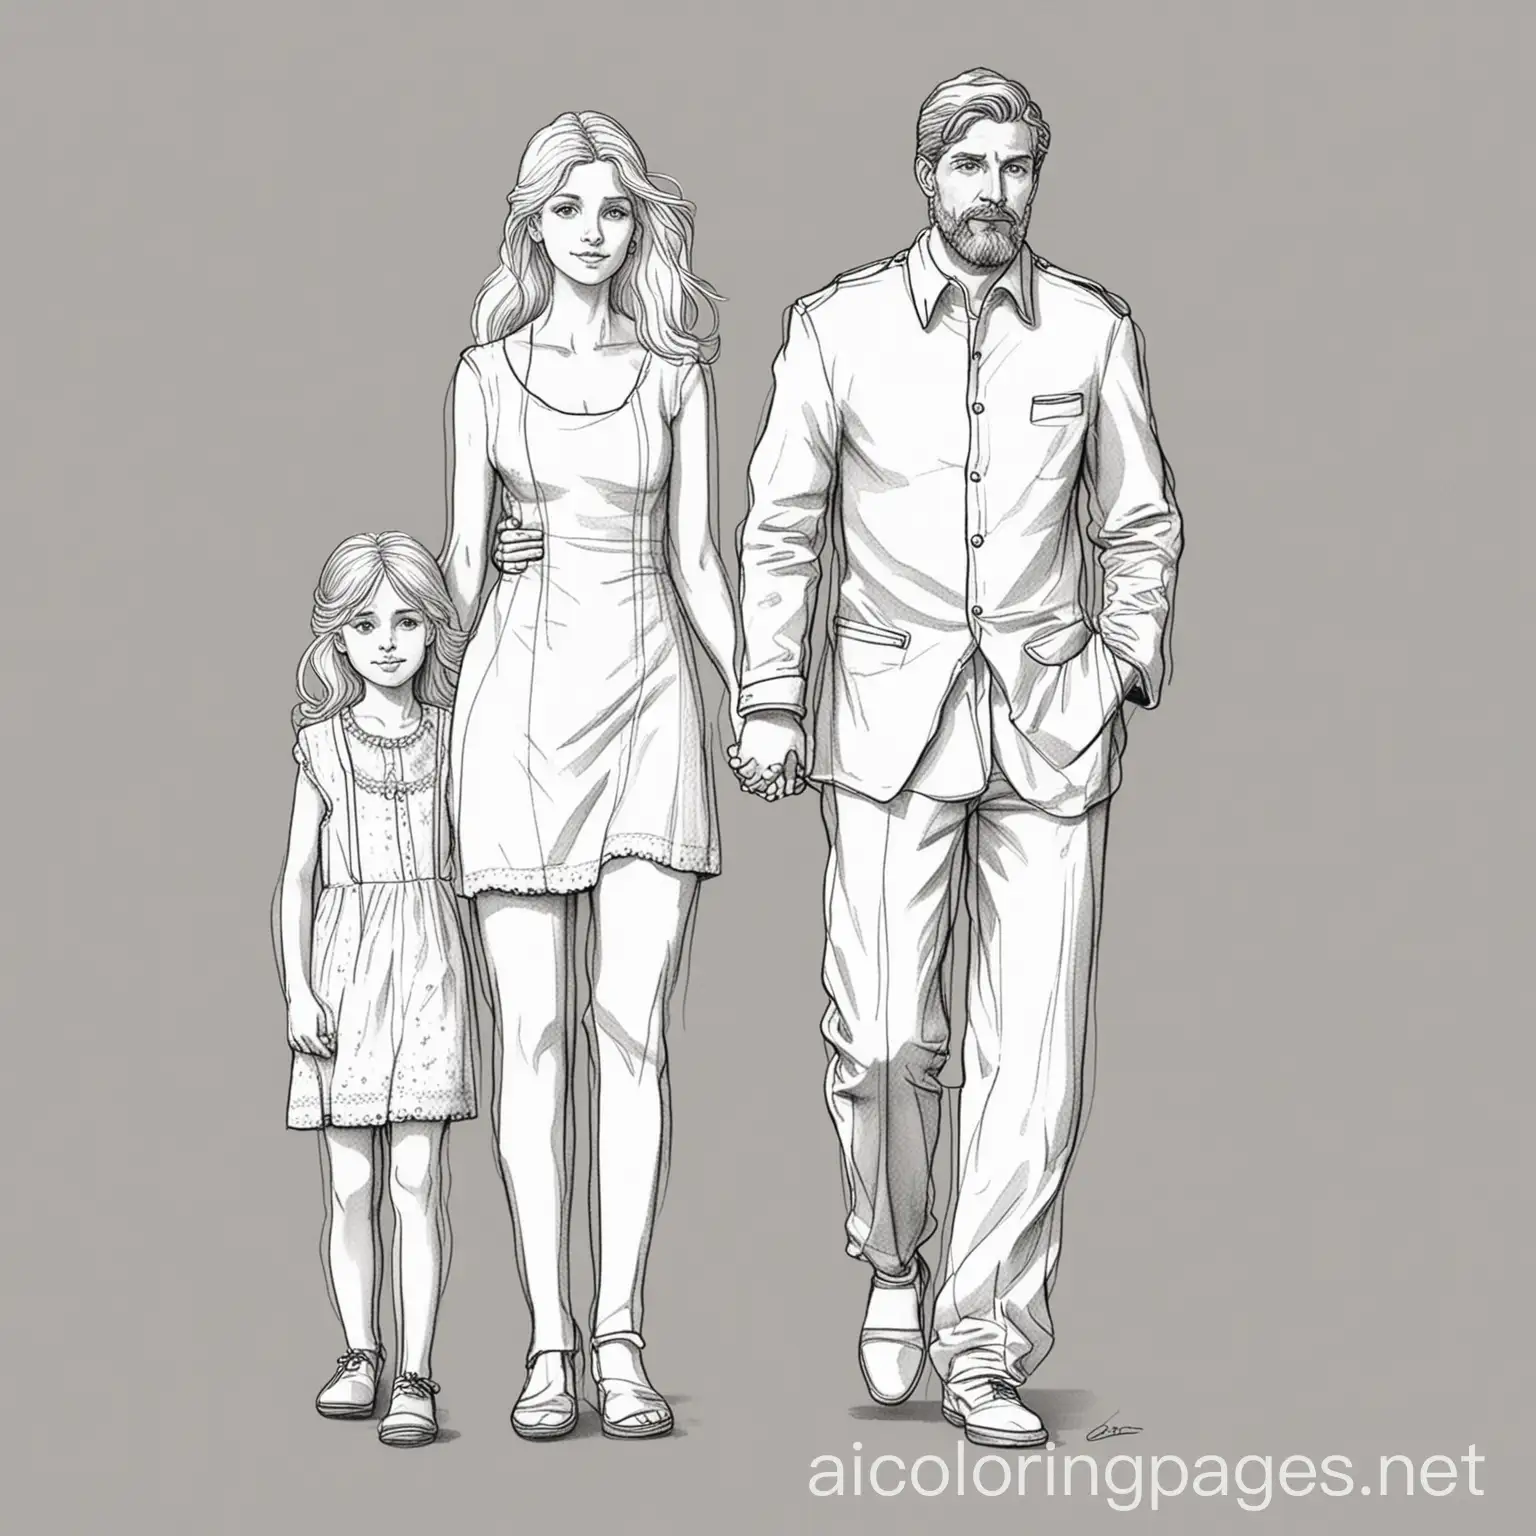 Barcelona-Family-Coloring-Page-Man-Lady-and-Children-in-Grey-and-White